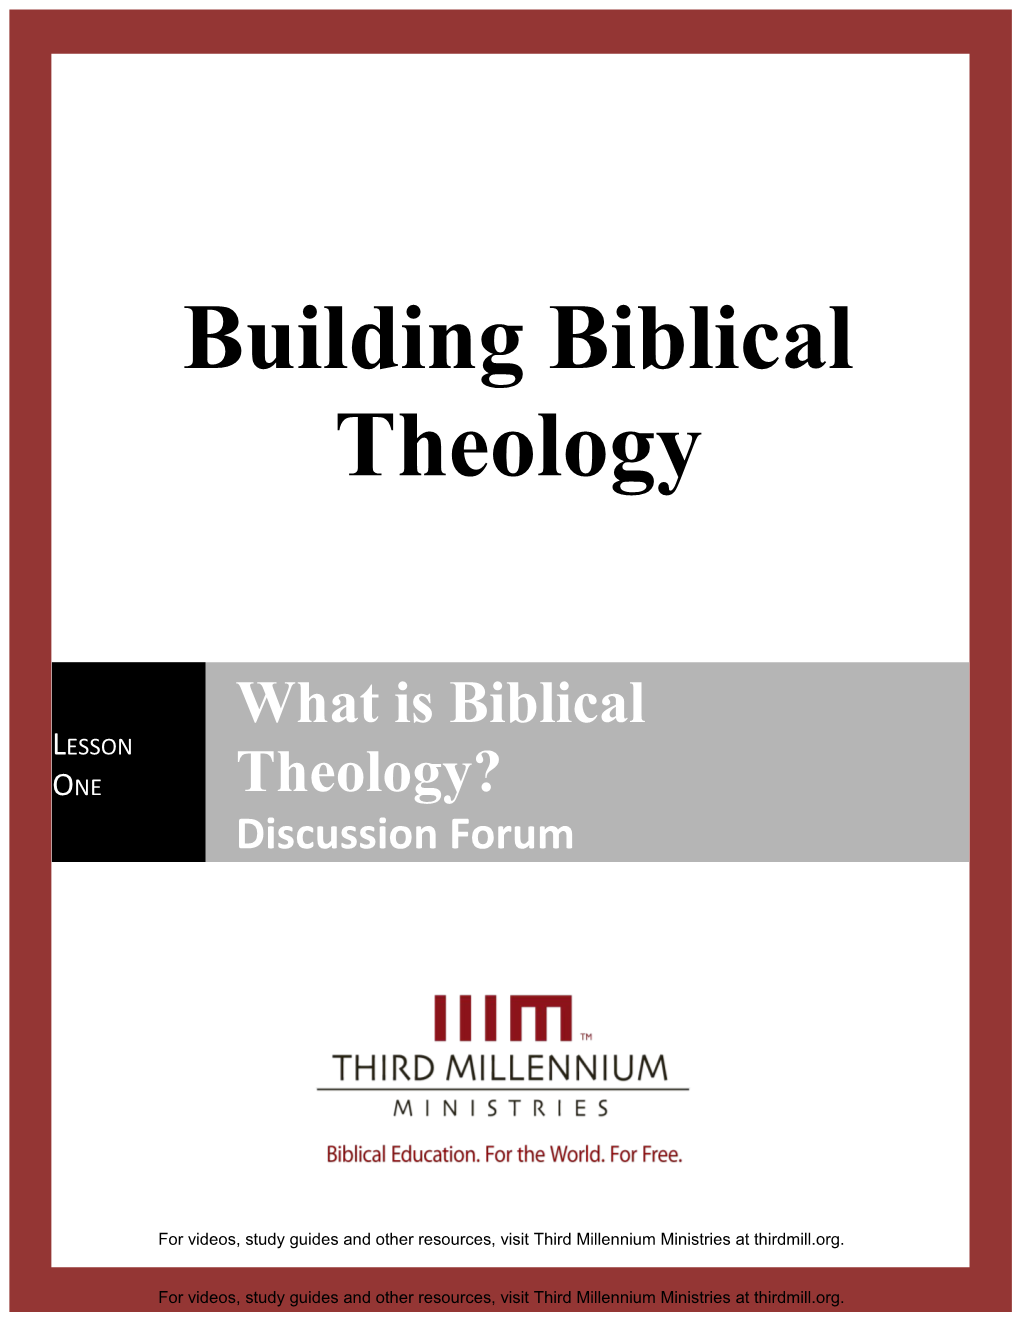 Building Biblical Theology Lesson 1